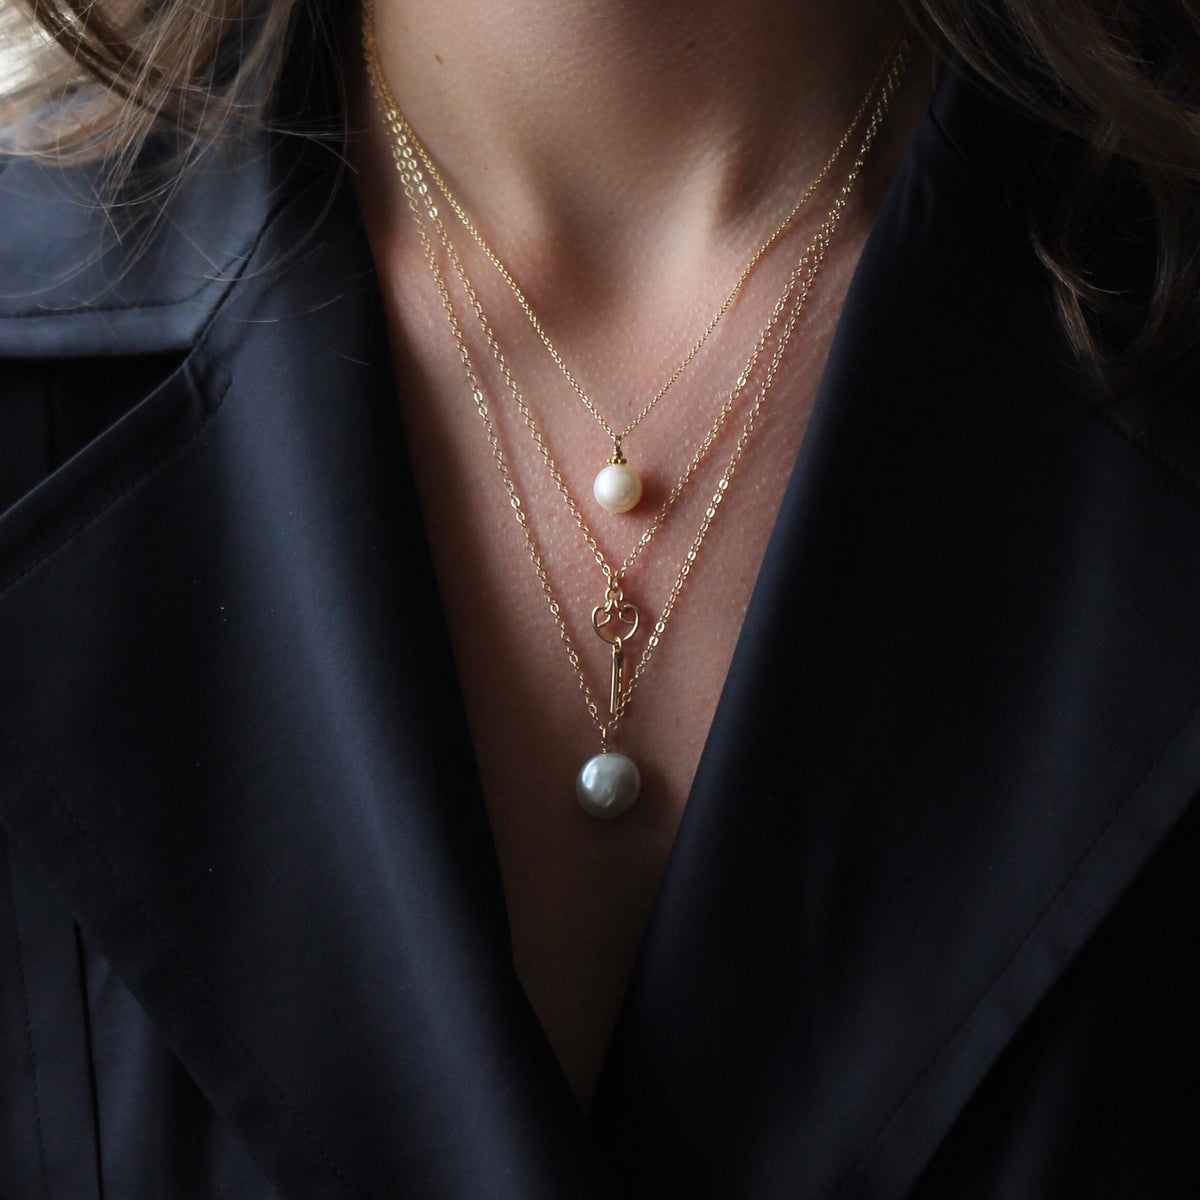 Layering Necklaces 101: Layering Lengths & Chain Mix Secrets 